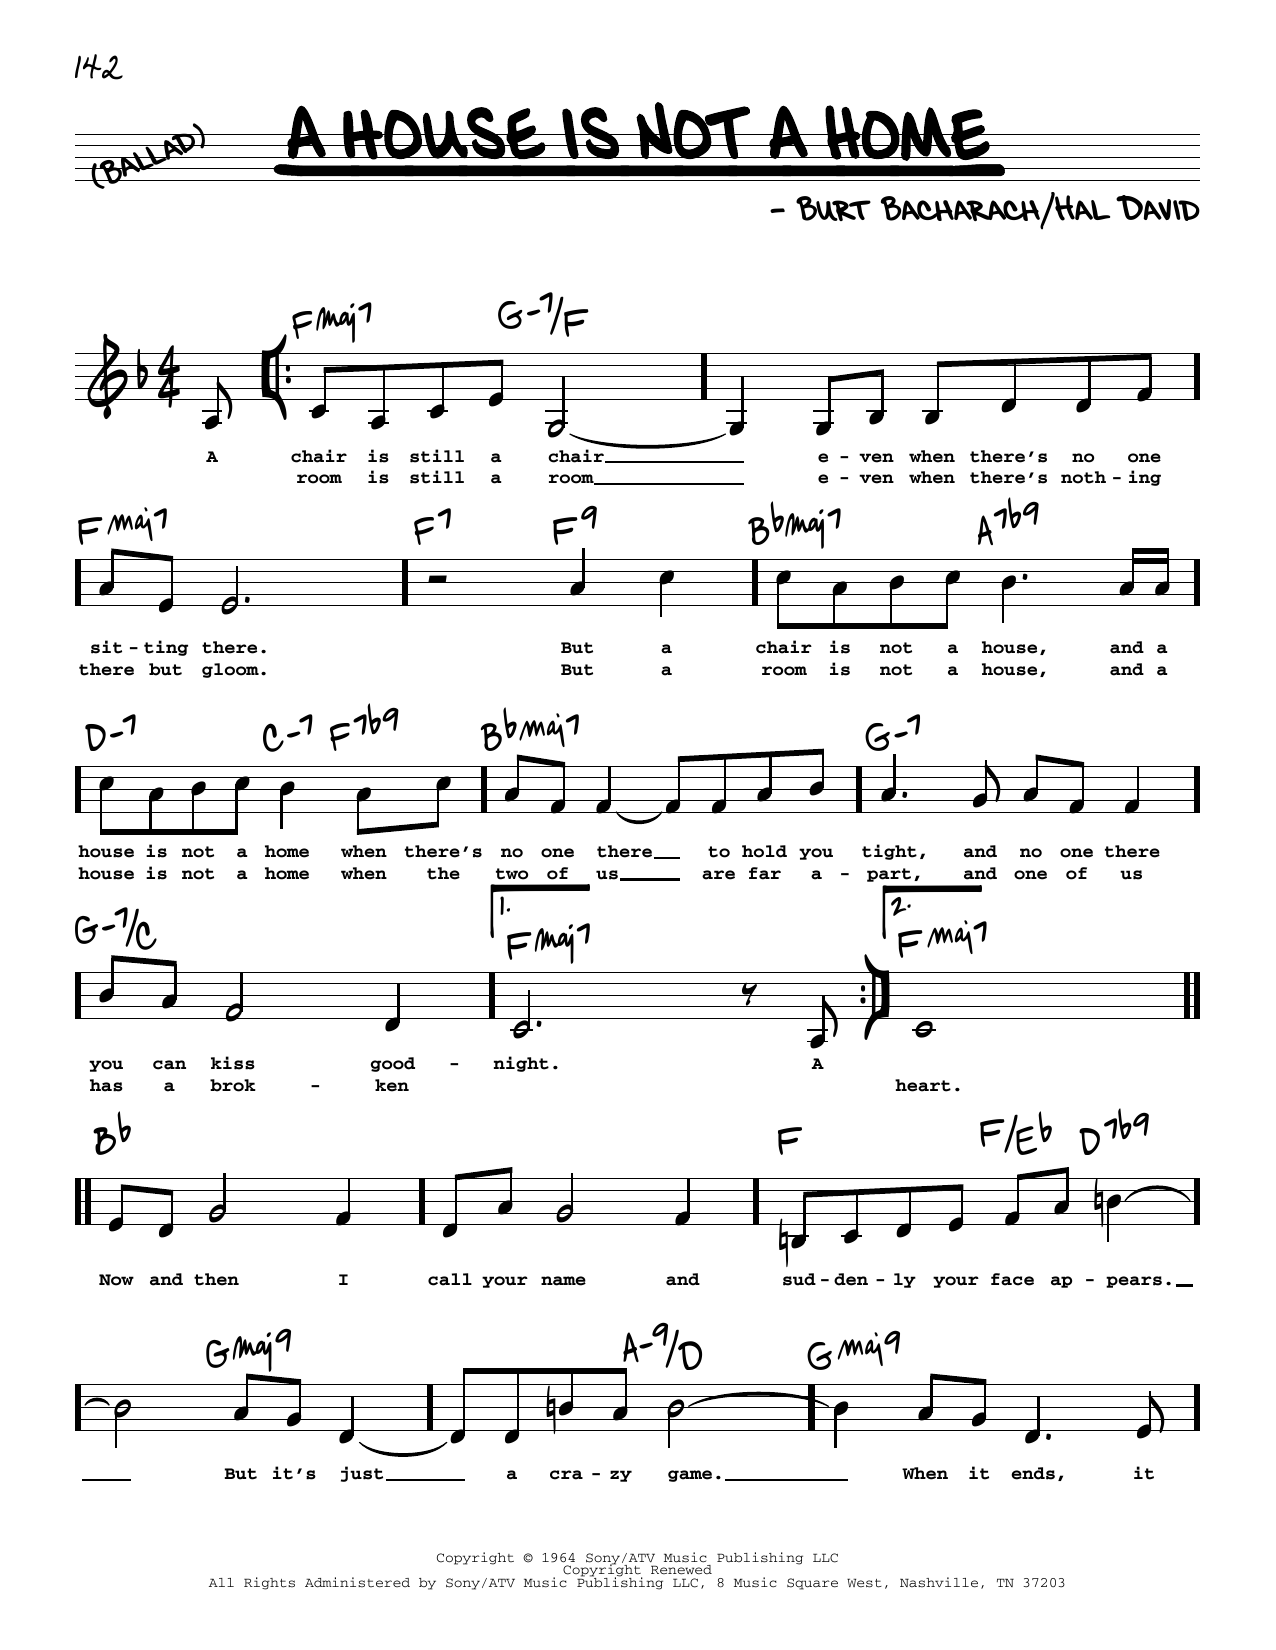 Bacharach & David A House Is Not A Home (Low Voice) sheet music notes printable PDF score